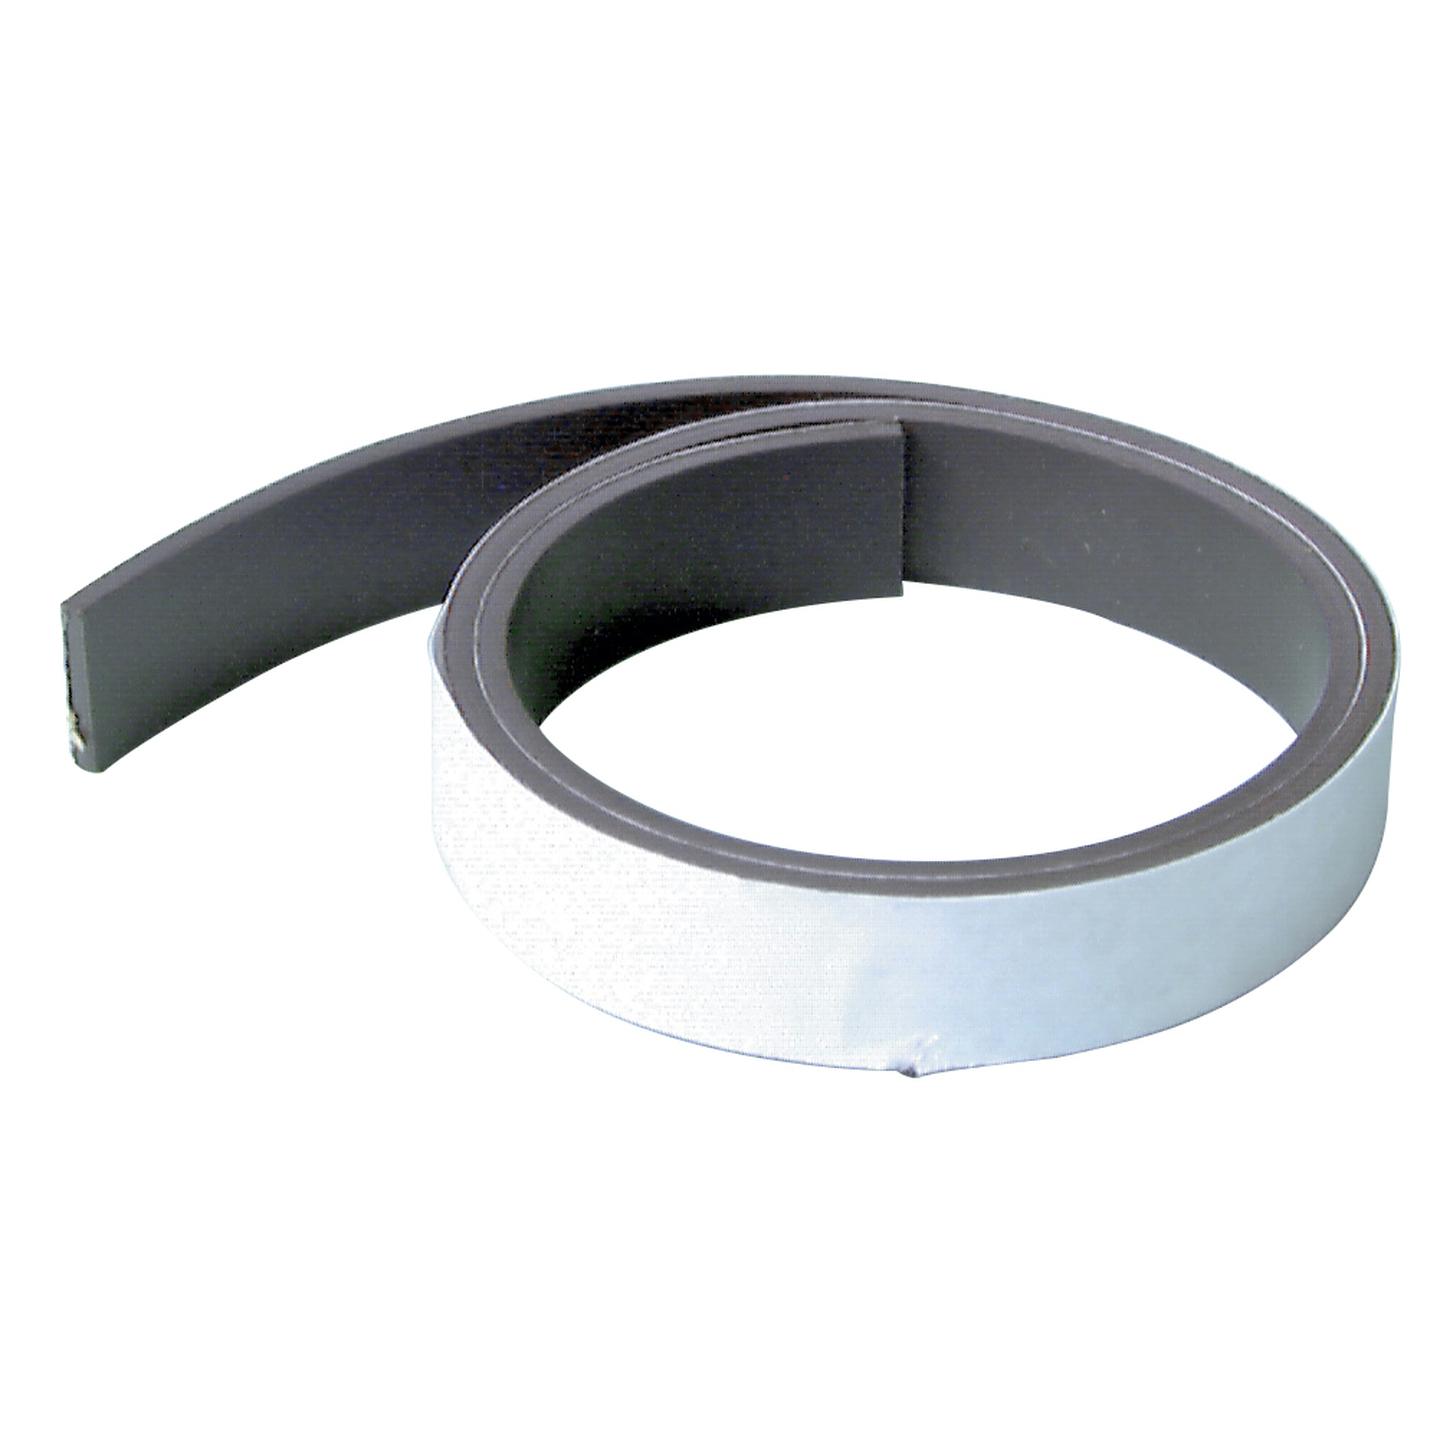 Flexible Adhesive Magnetic Rubber Strip